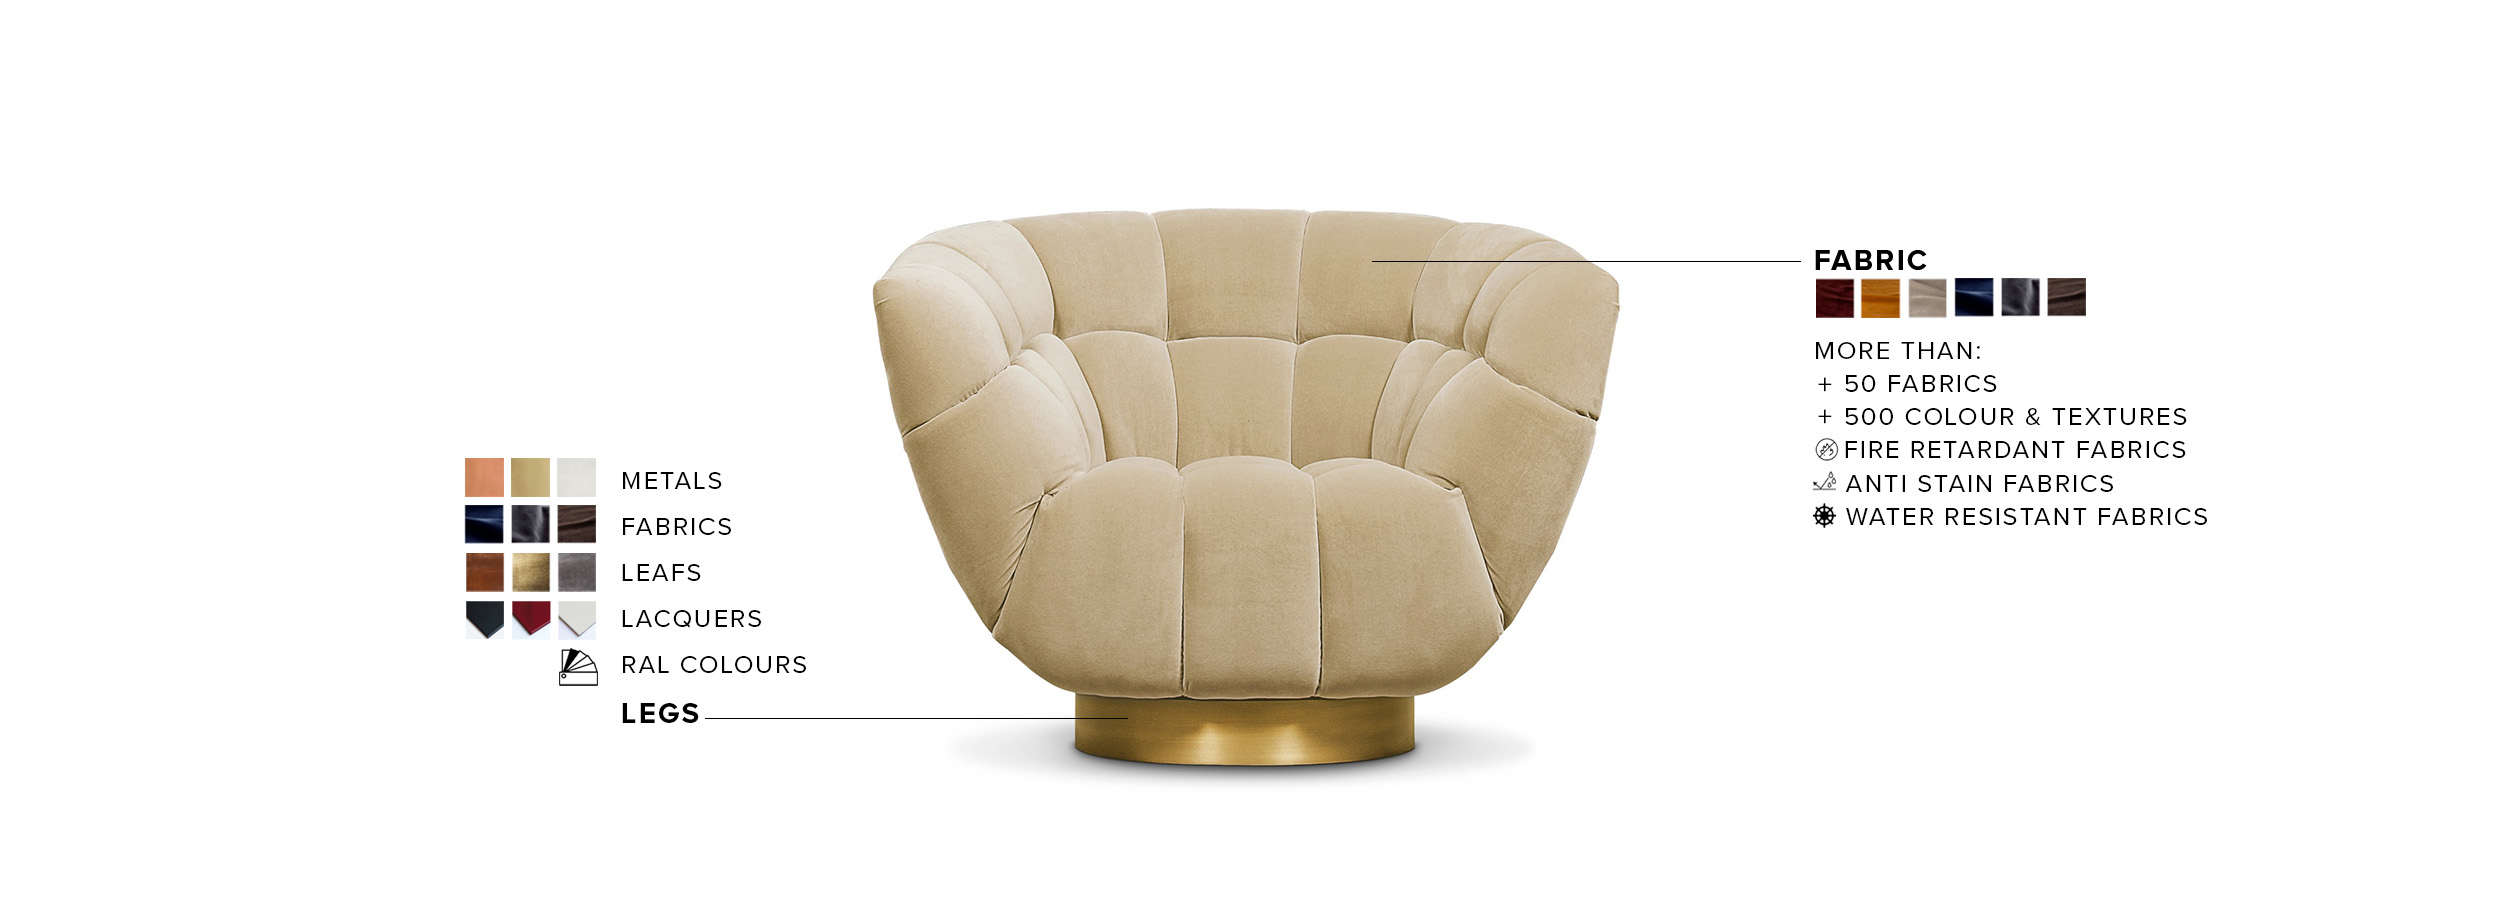 ESSEX Swivel Armchair: A Refined and Elegant Statement Seating Product - Home'Society